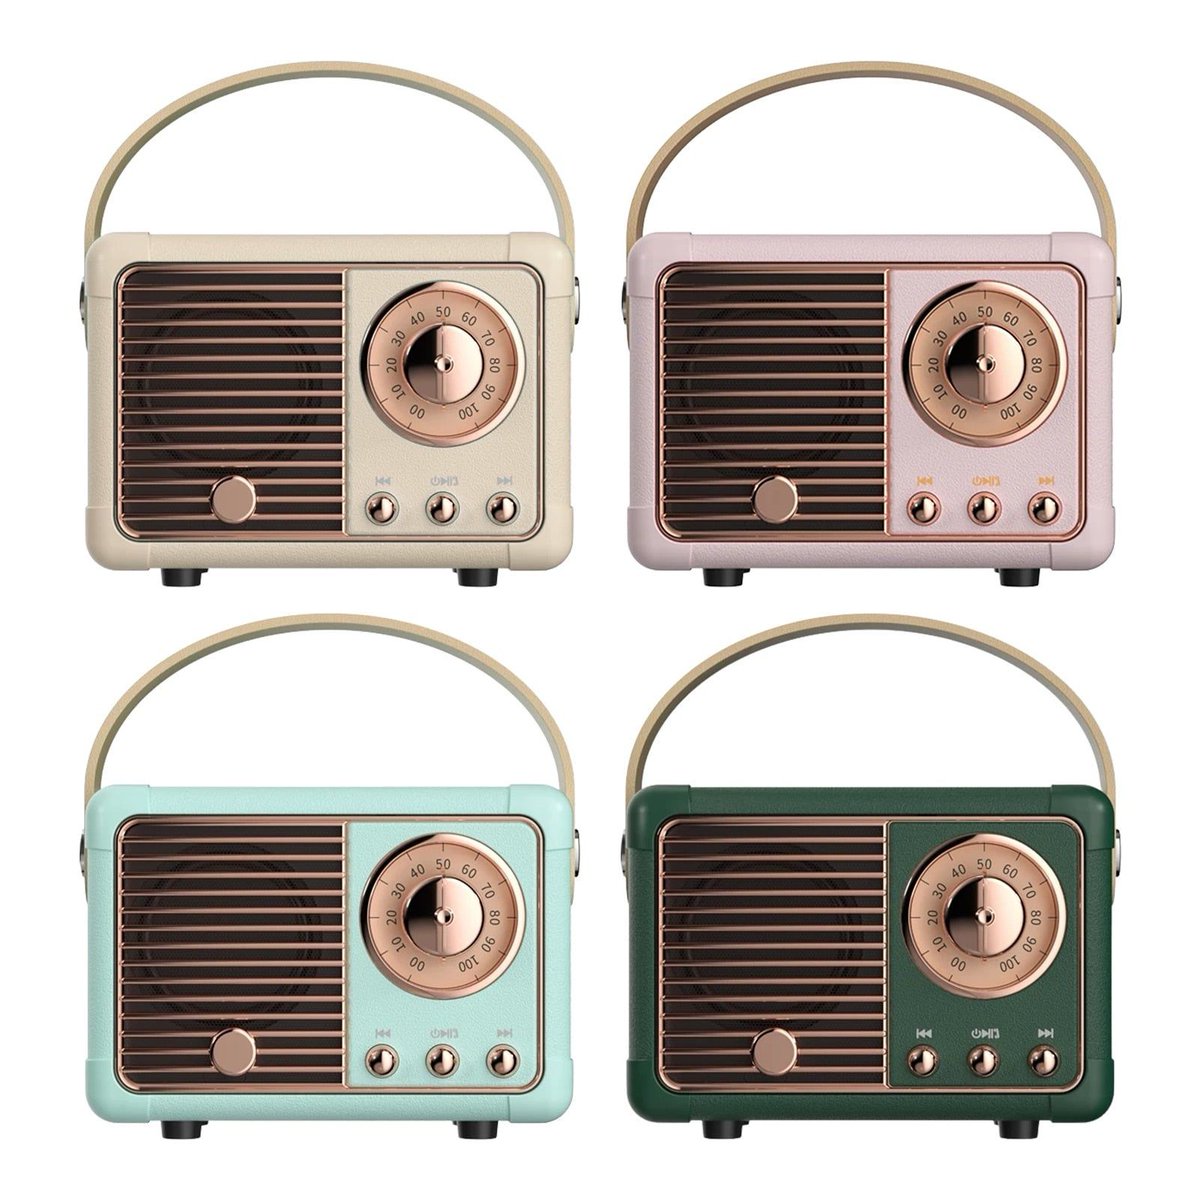 buff.ly/46uCksI  Check out this amazing retro Bluetooth speaker that would make the perfect birthday gift!  Join our affiliate community now and start earning a 20% commission on every completed order. #dropship available. #birthday gifts #gifts #giftideaas #speaker